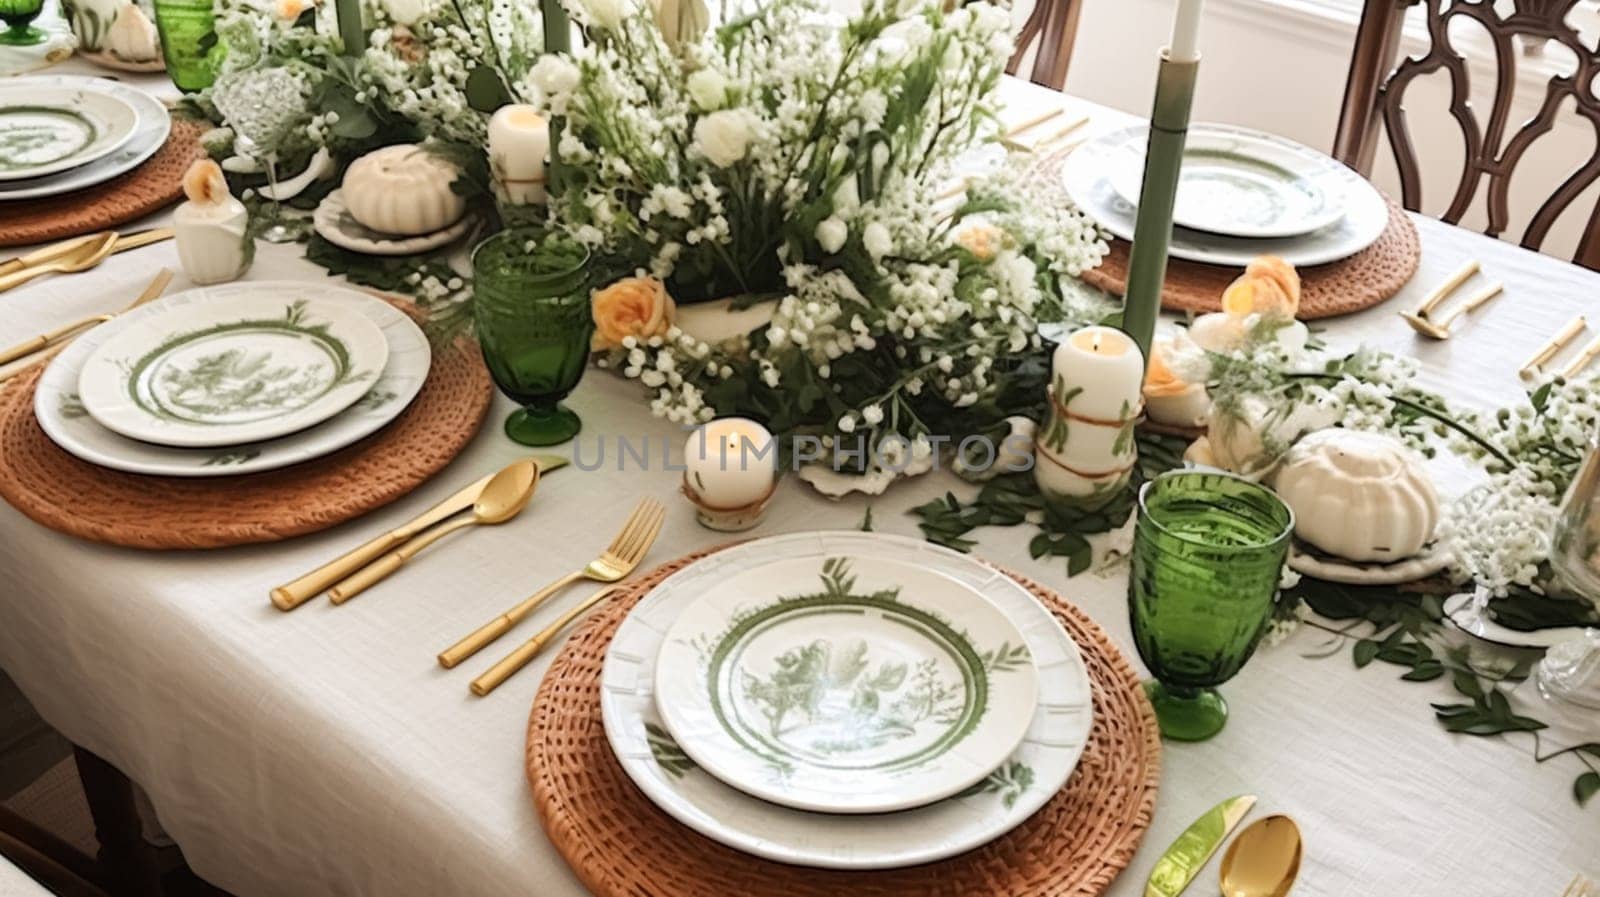 Green and white table decor, holiday tablescape and dinner table setting, formal event decoration for wedding, family celebration, English country and home styling inspiration